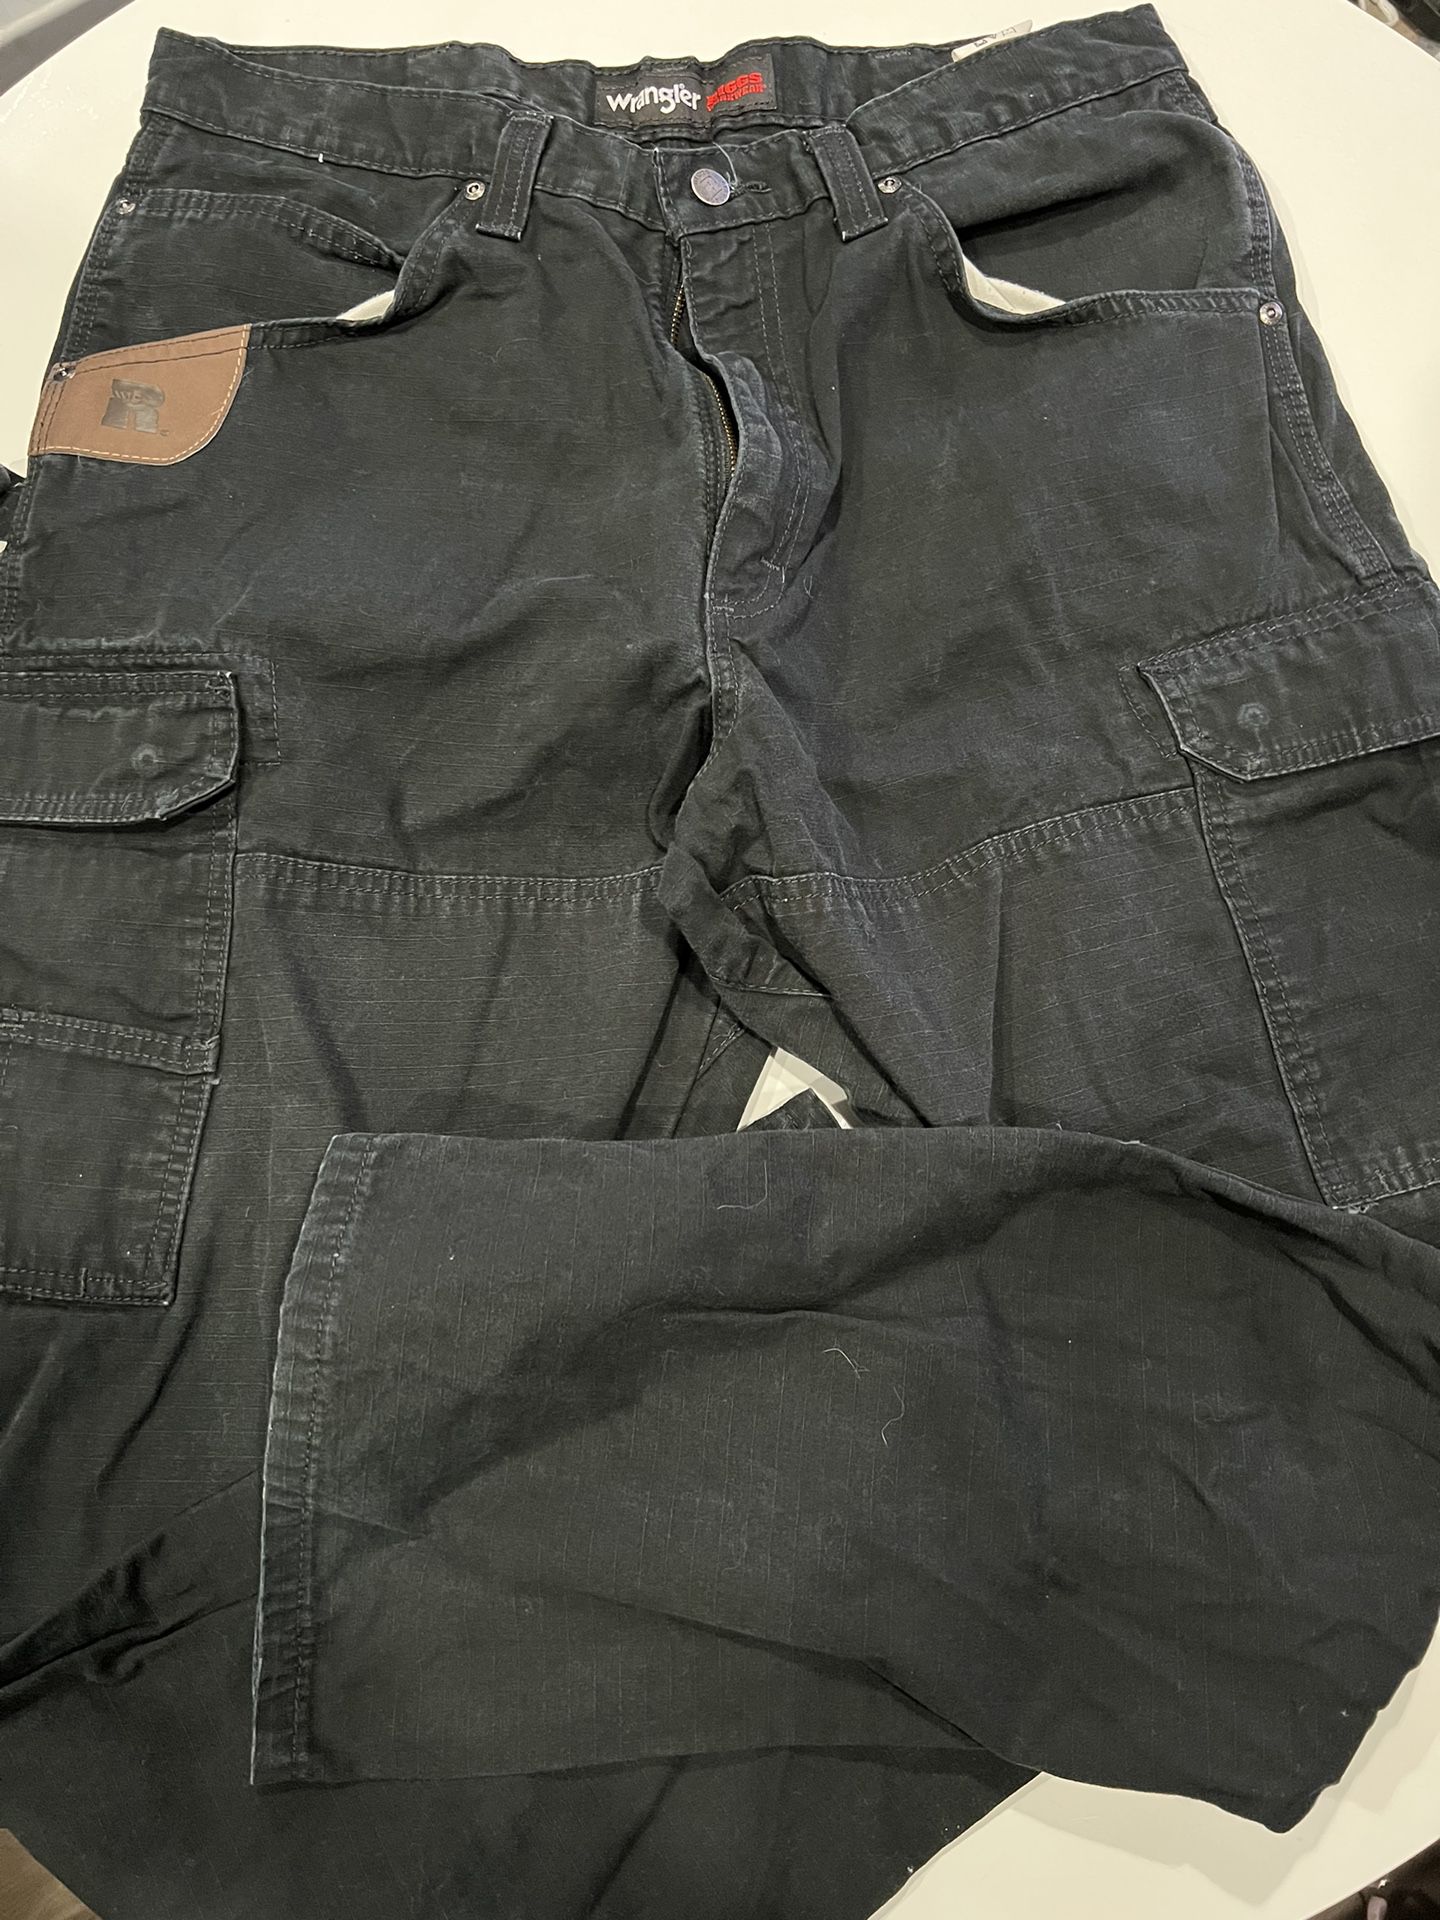 Wrangler Riggs Workwear Black Ripstop Cargo Pants 36x32 Faded Worn for Sale  in Federal Way, WA - OfferUp